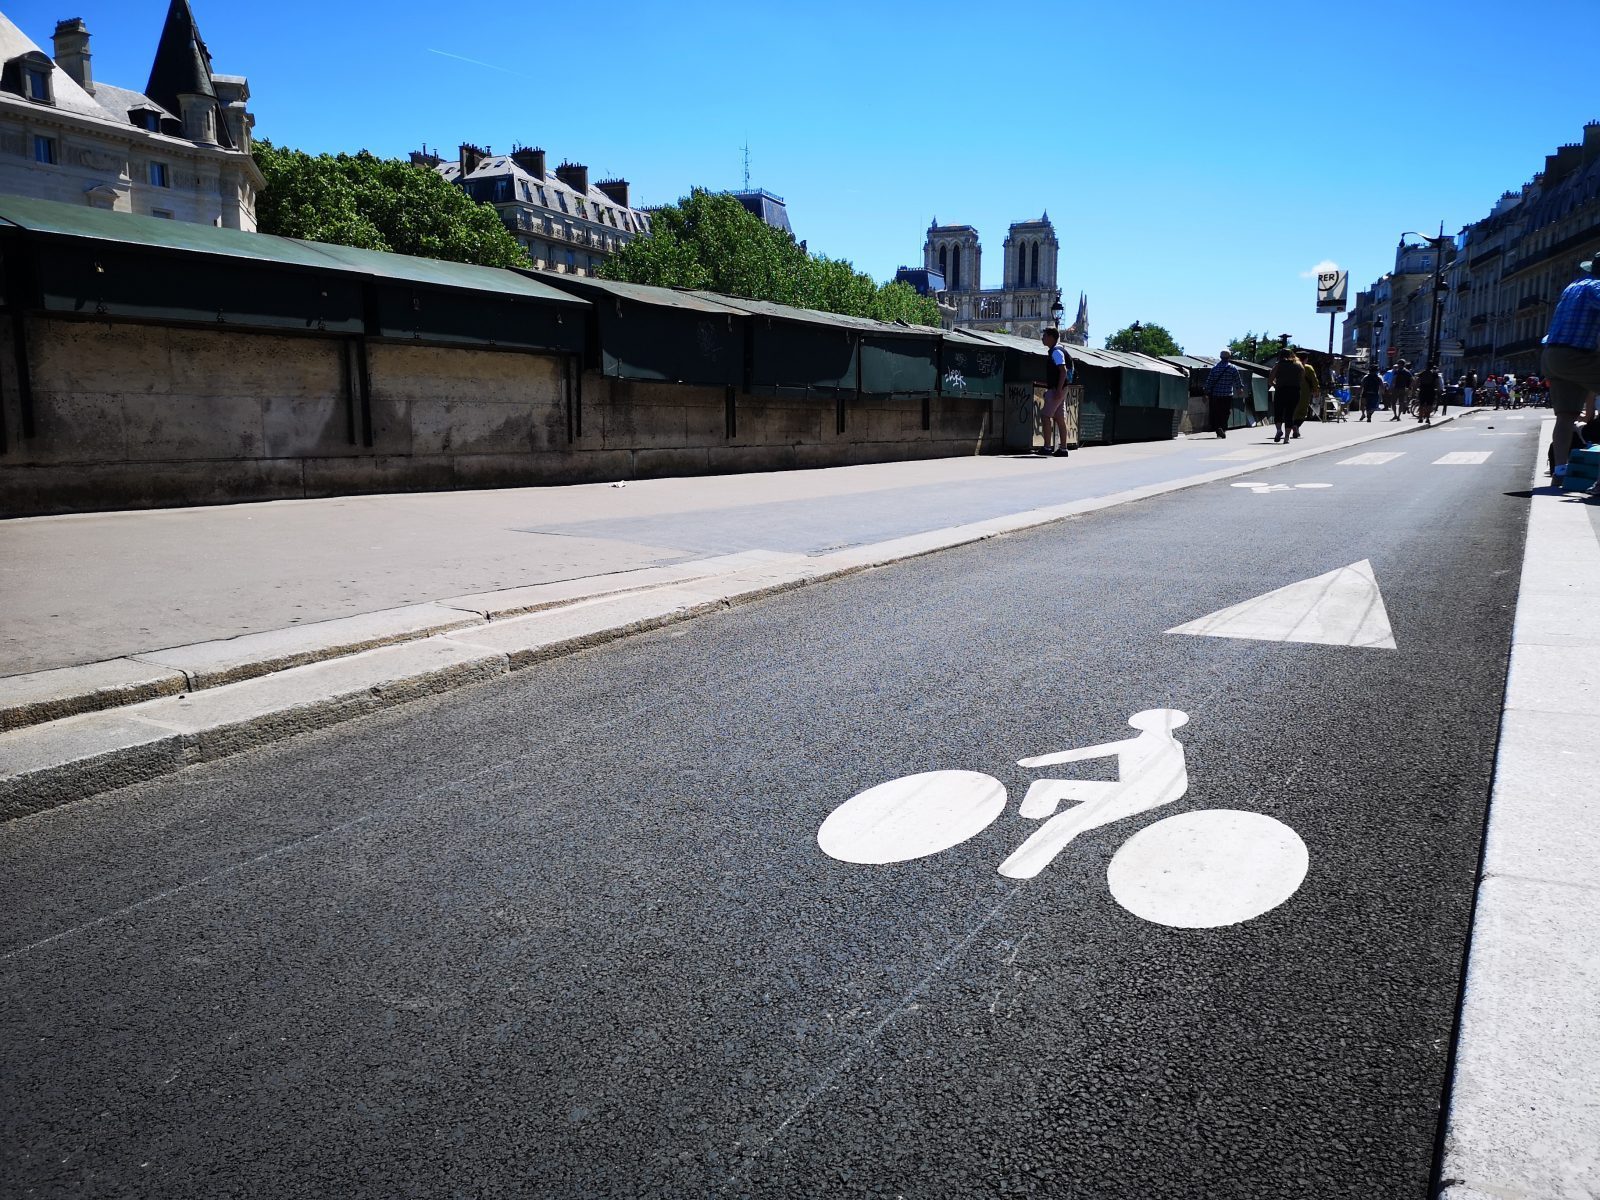 NEW CYCLE LANES IN PARIS